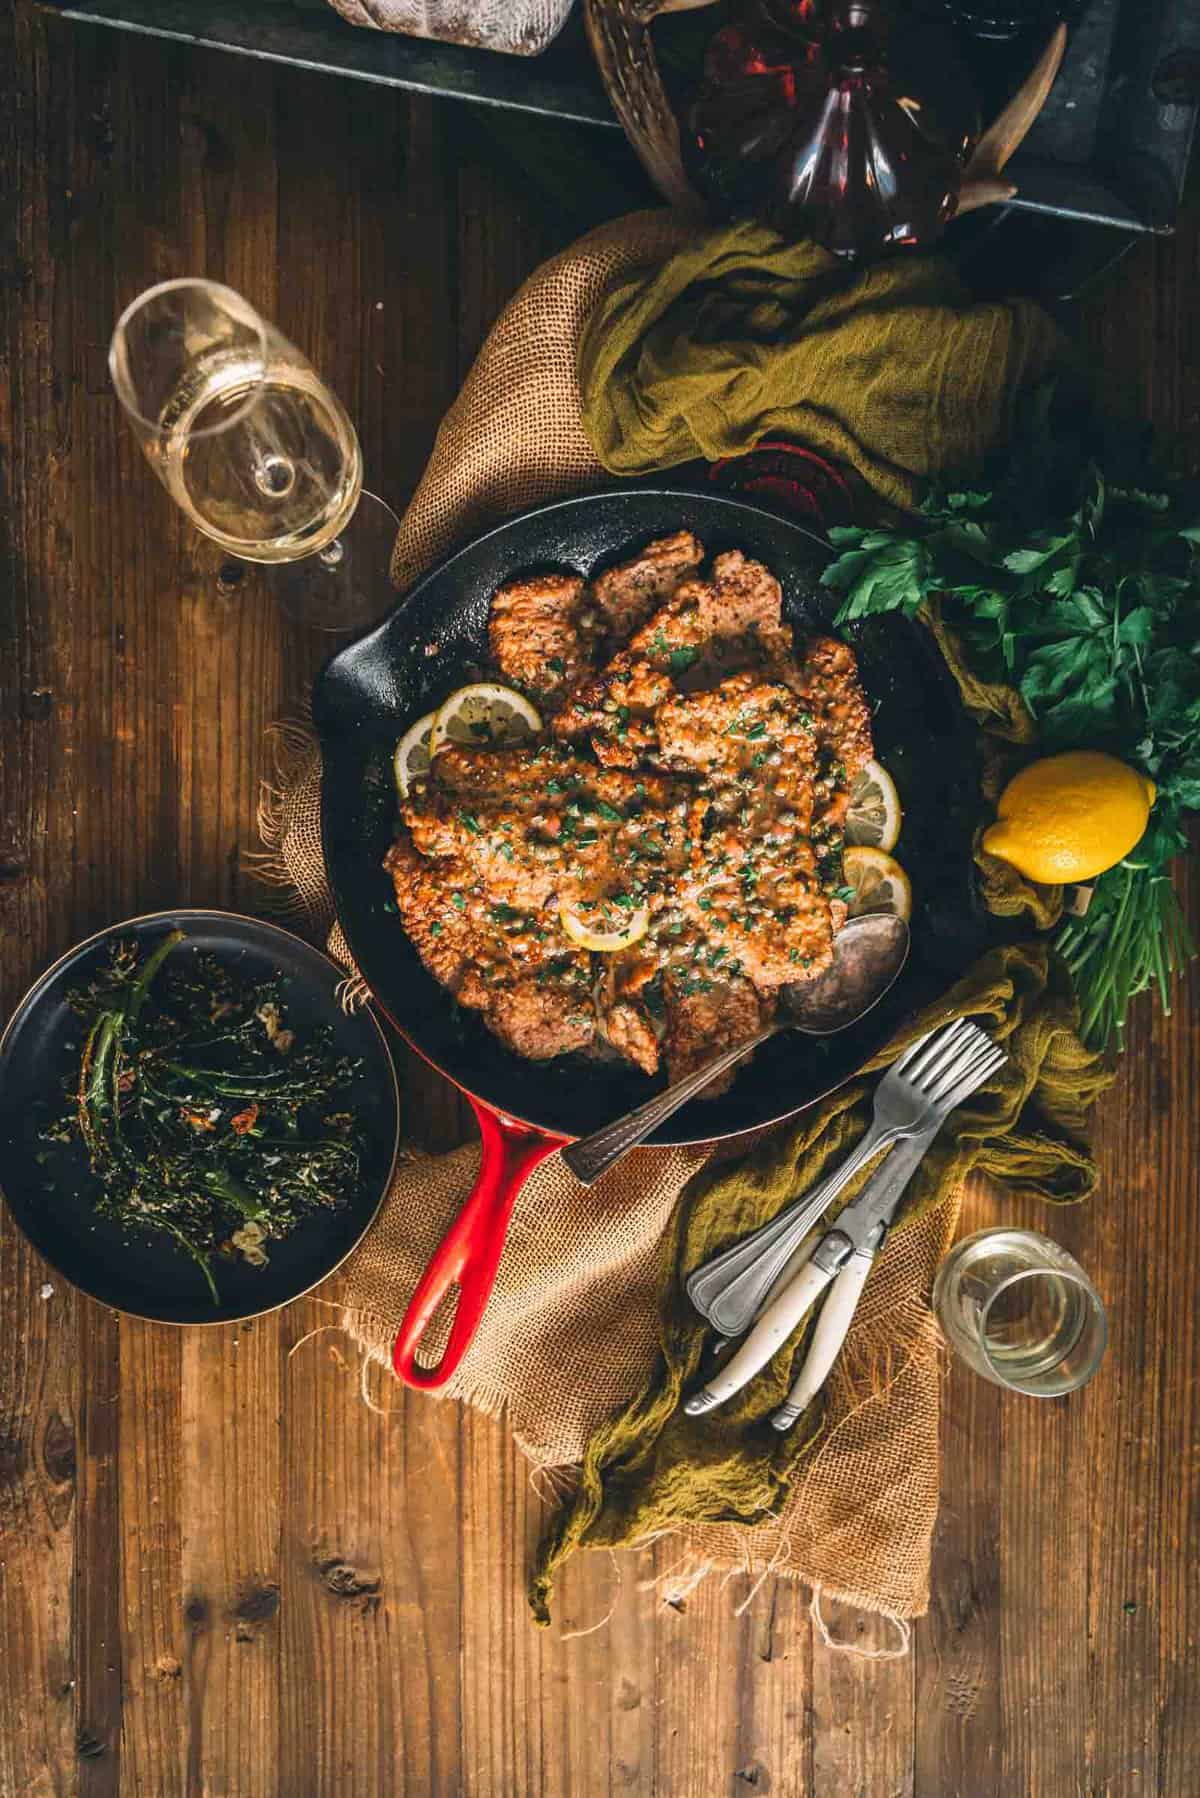 A cast iron skillet with veal cutlets and herbs on a wooden table.